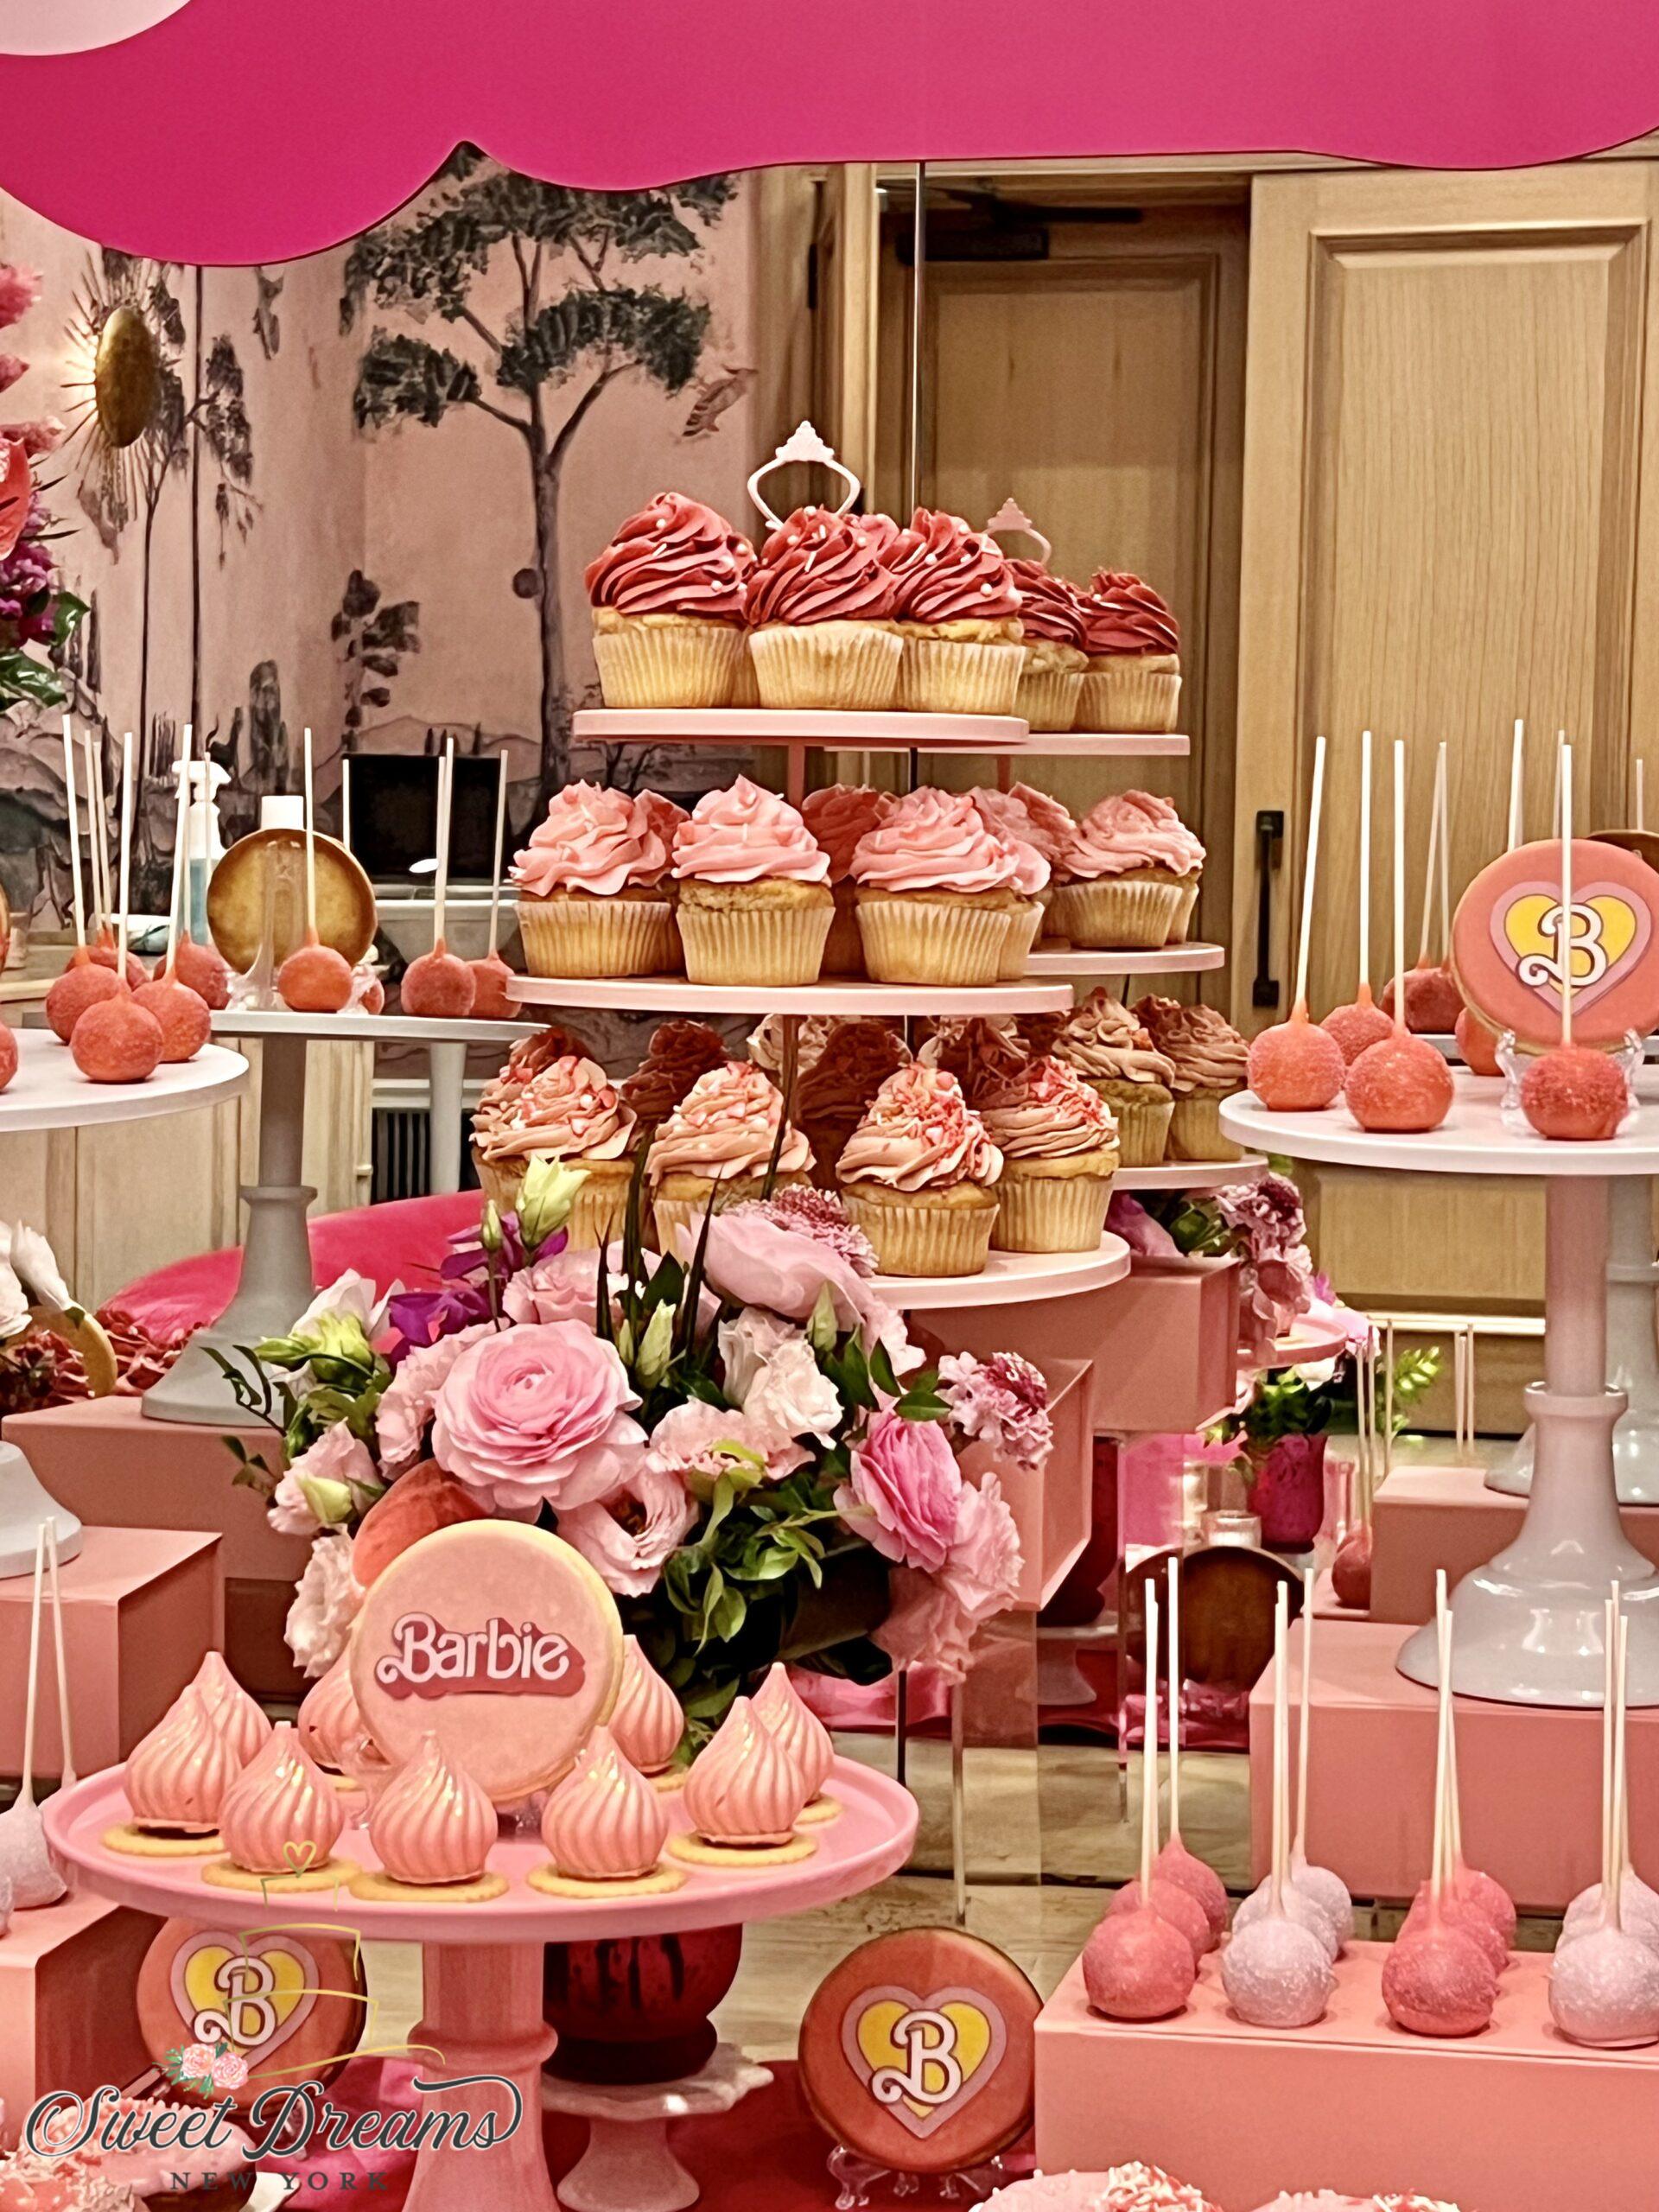 Barbie The Movie Dessert Table NYC Official Premiere Pink birthday Bridal Shower pink Desserts